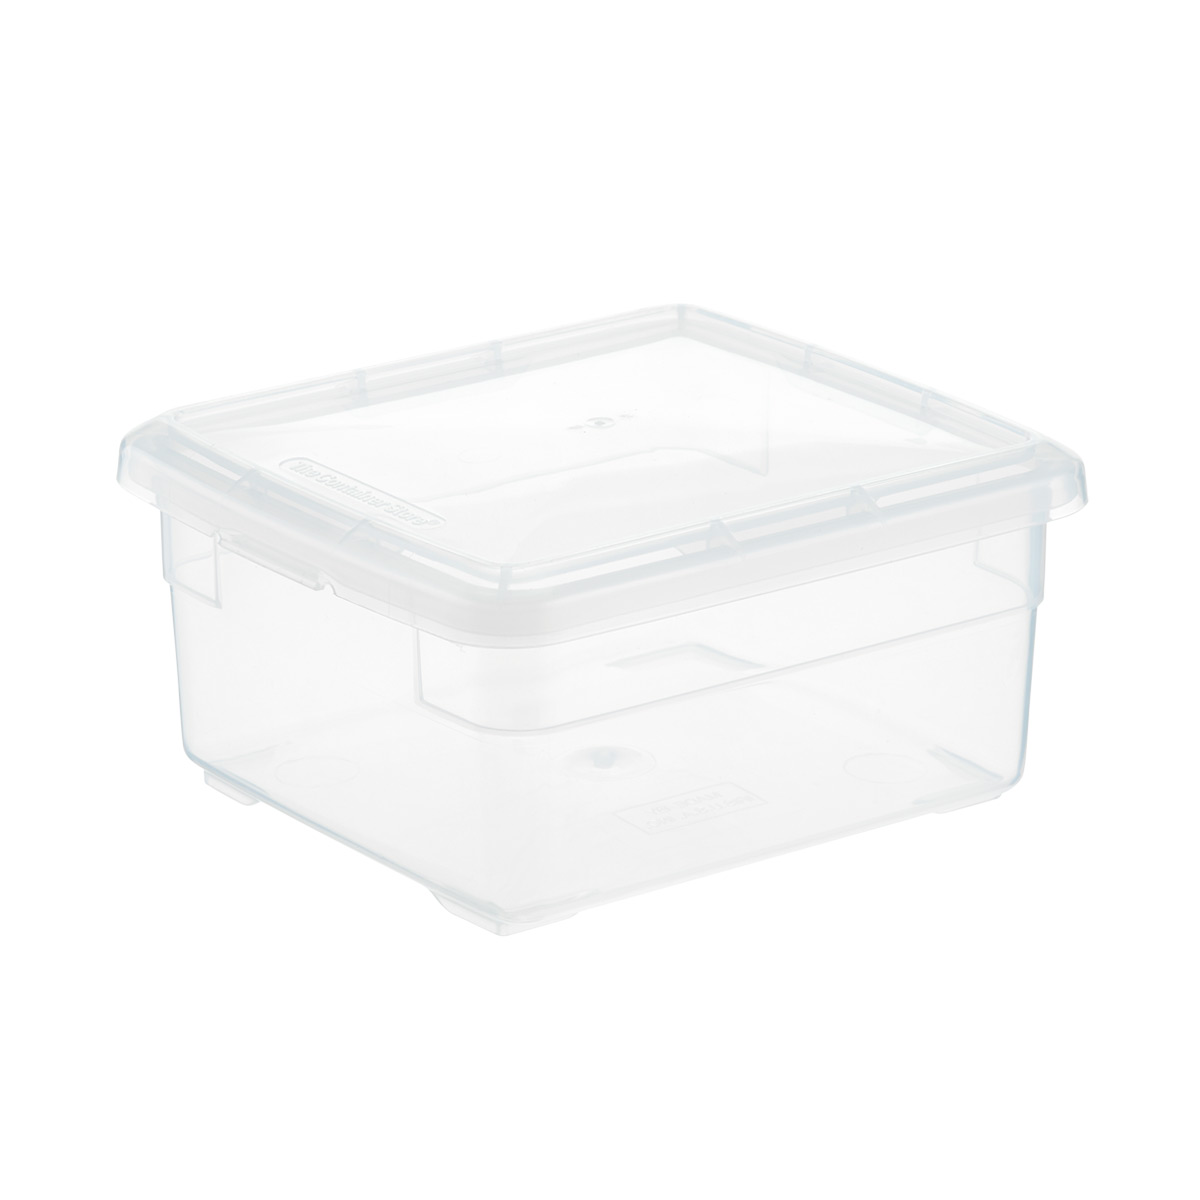 Our Accessory Box | The Container Store